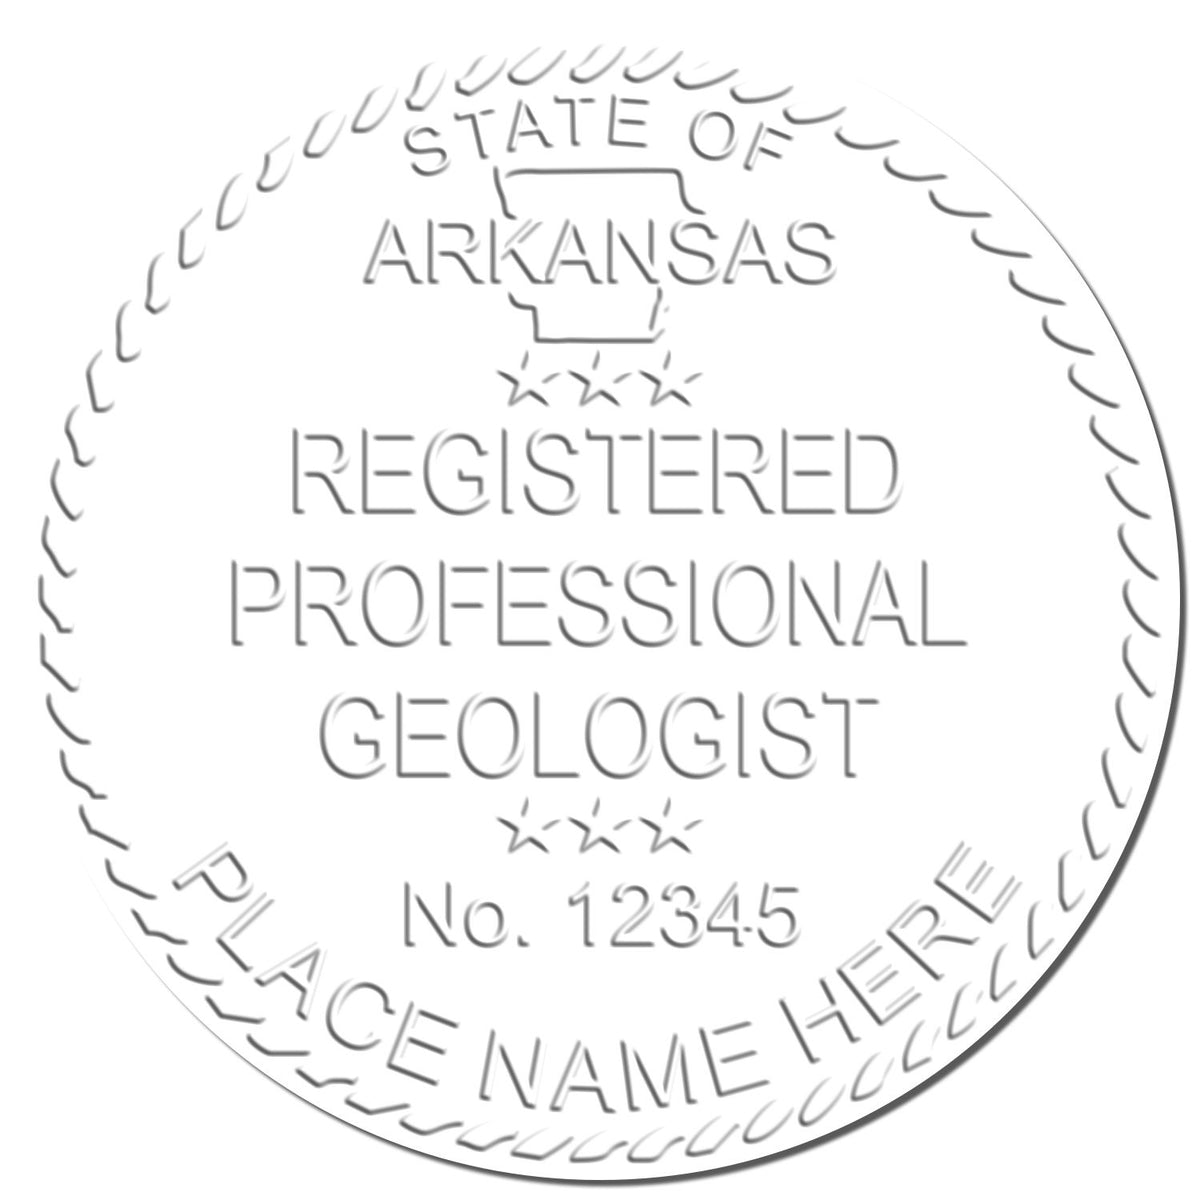 A stamped imprint of the Soft Arkansas Professional Geologist Seal in this stylish lifestyle photo, setting the tone for a unique and personalized product.